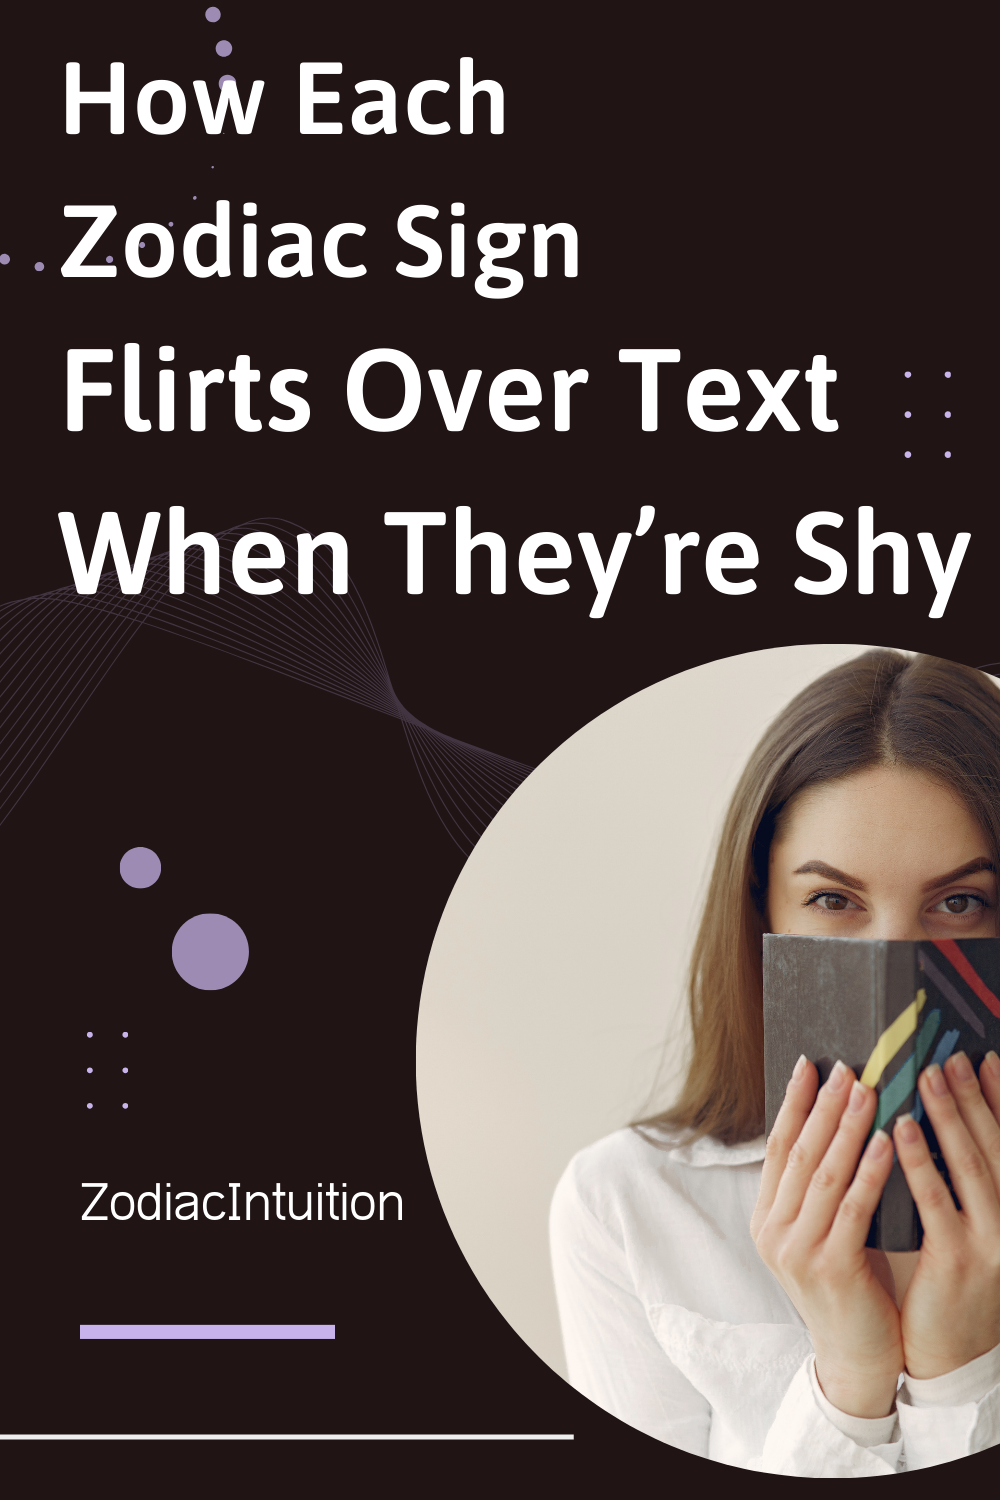 How Each Zodiac Sign Flirts Over Text When They’re Shy